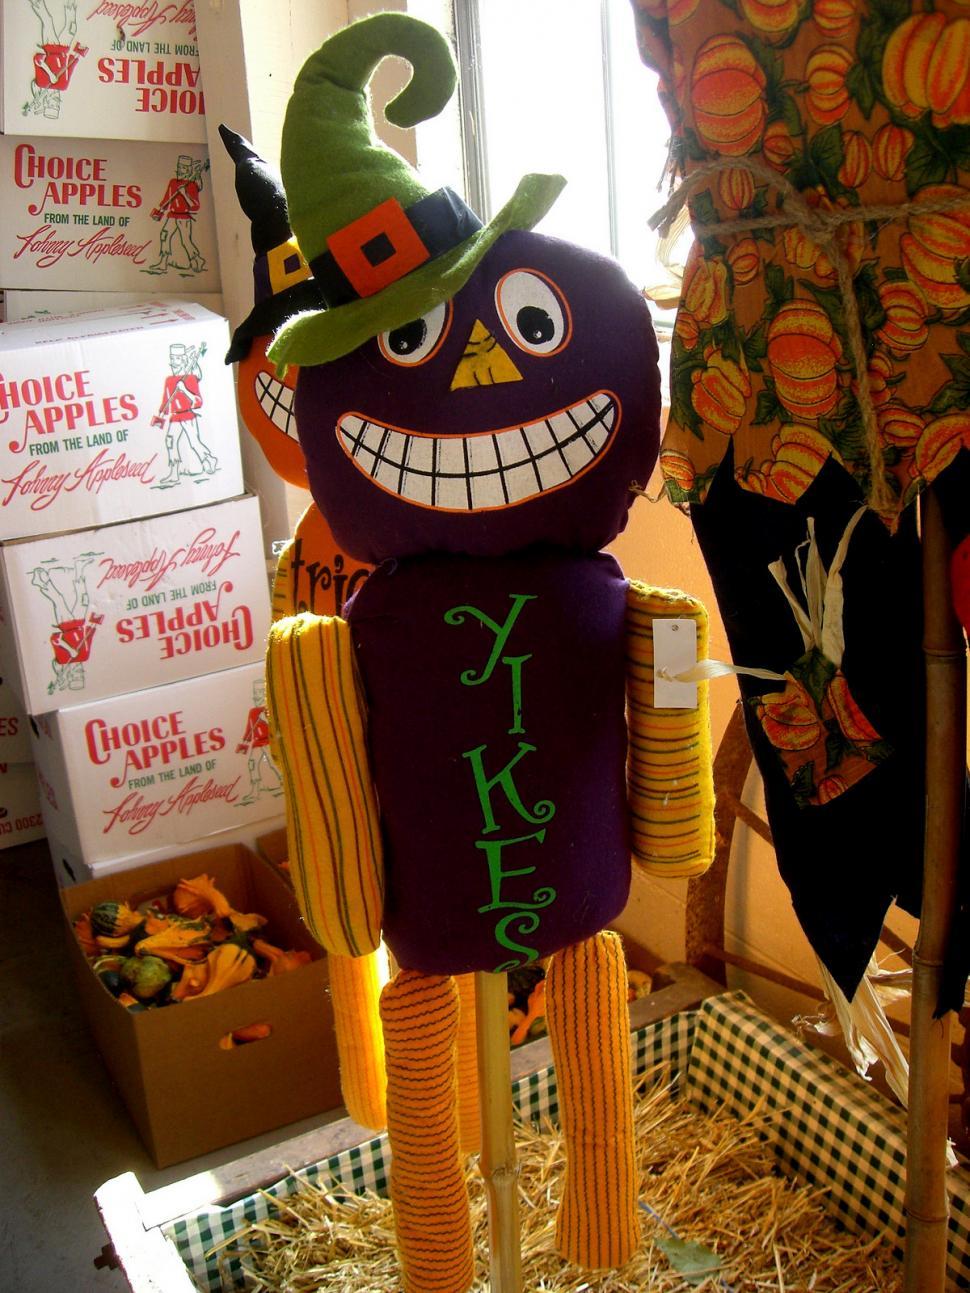 Free Image of Scarecrow With Green Hat and Pumpkin 